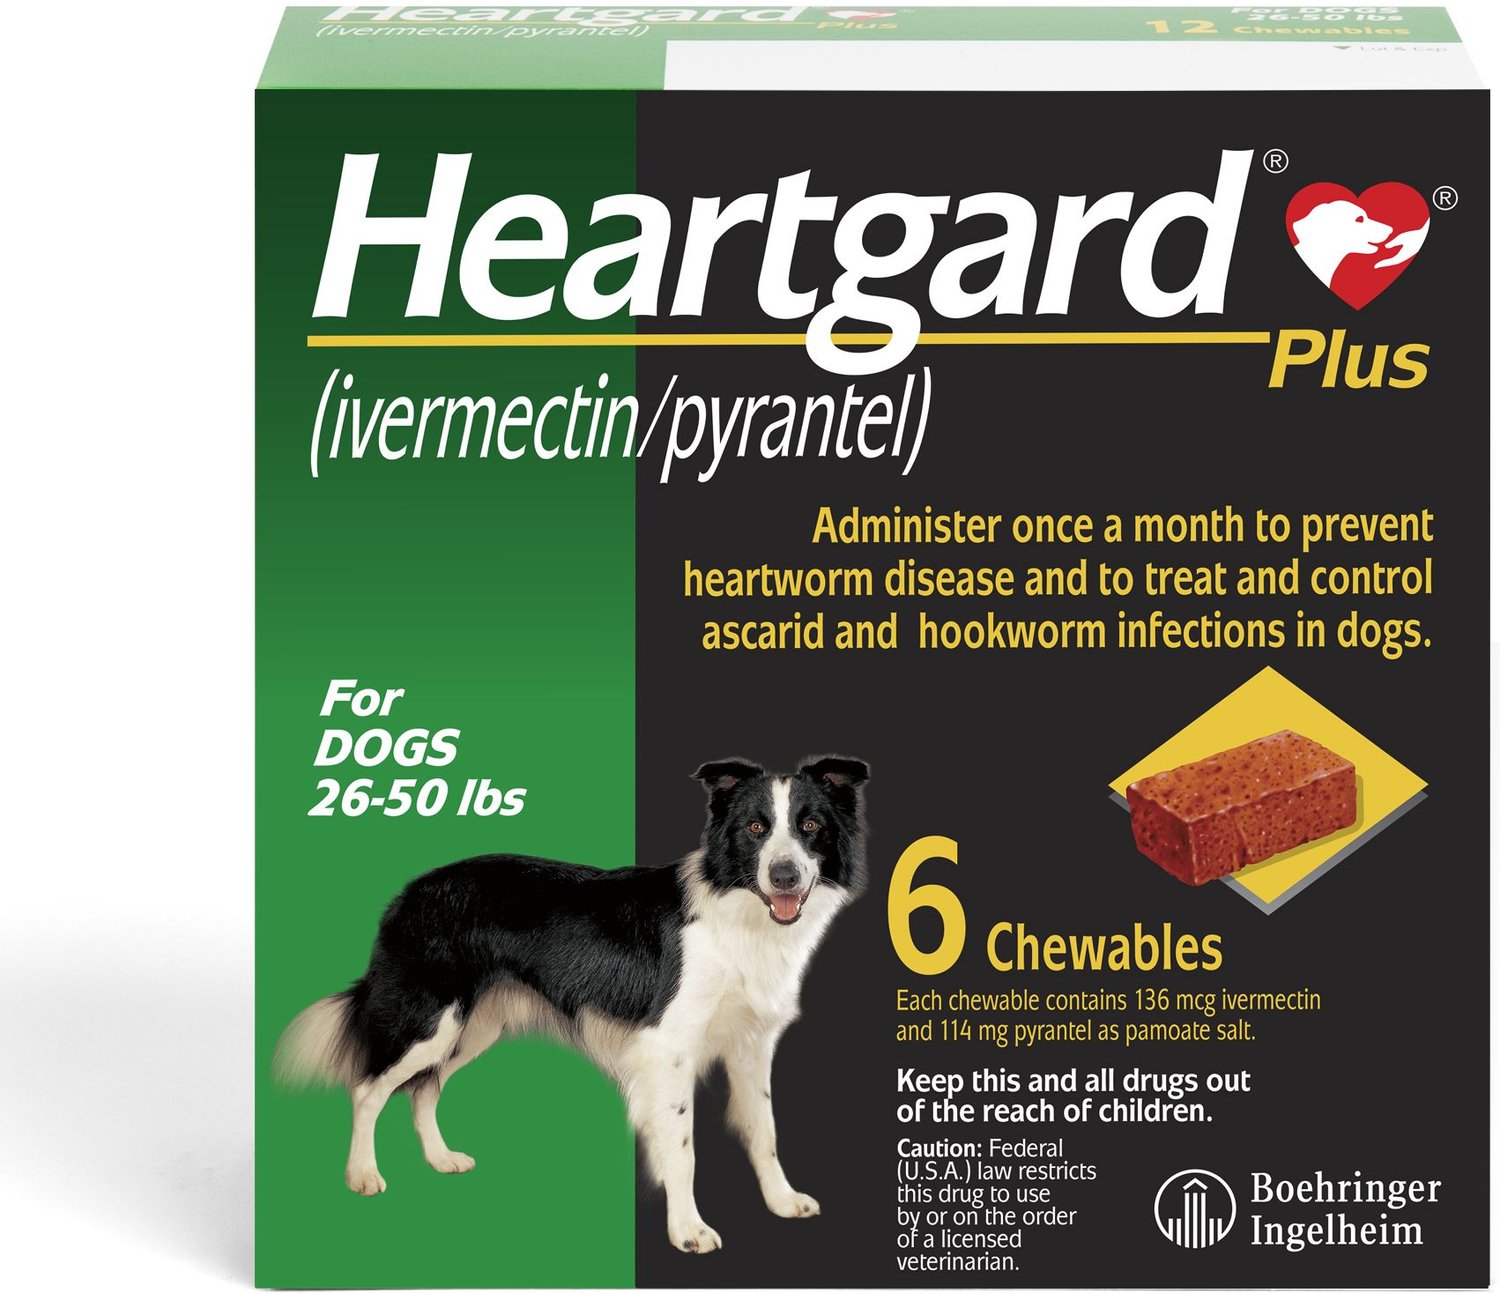 Heartgard Plus Chewables For Dogs 26 50 Lbs 6 Treatments Green Box 